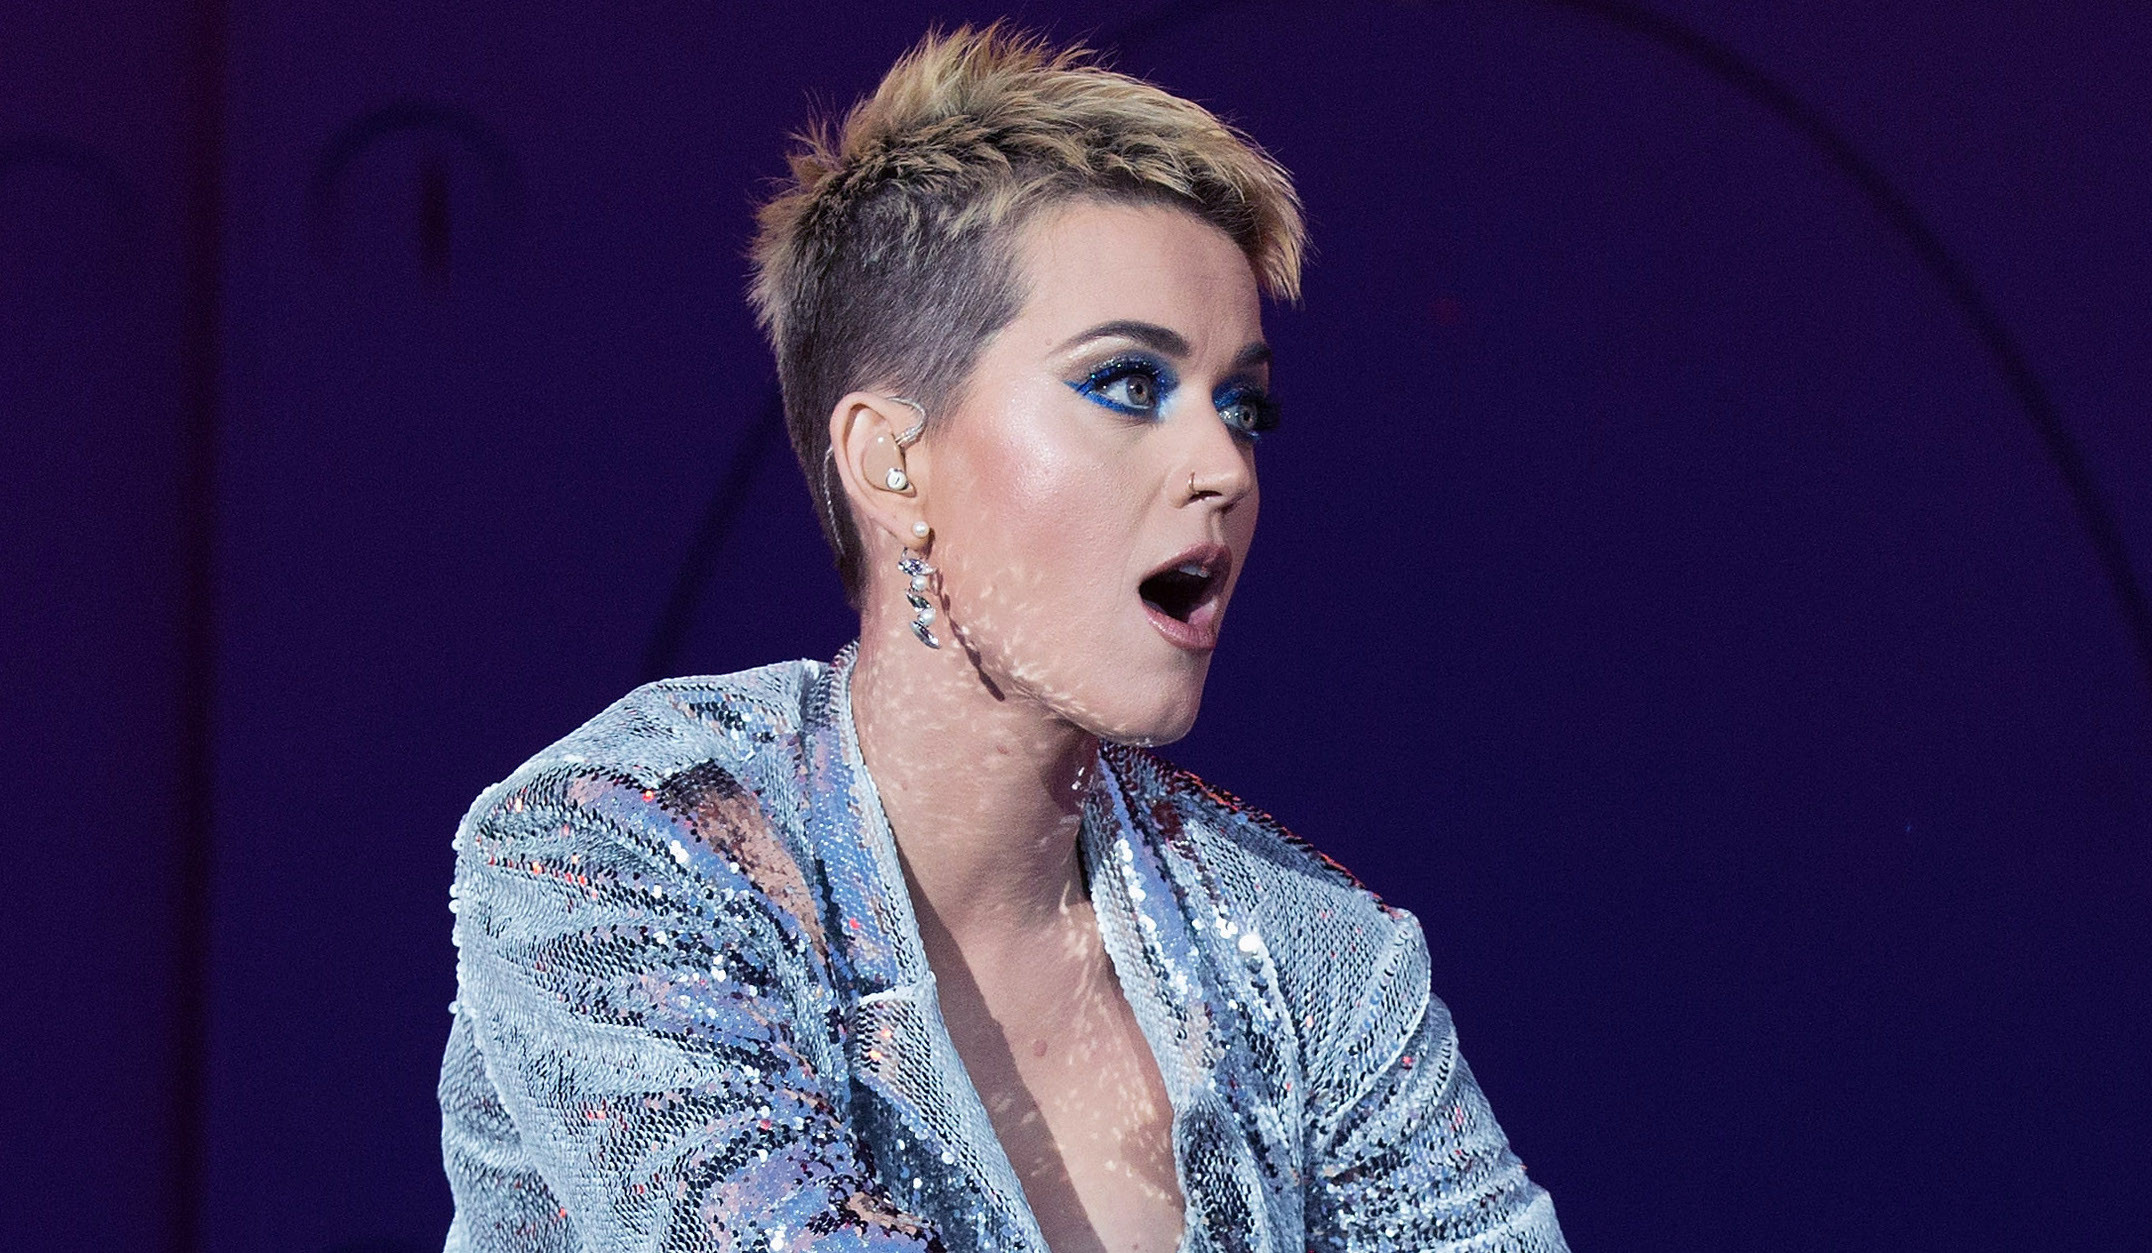 Katy Perry Flashes Her Bare Butt on 'Witness' Live Stream